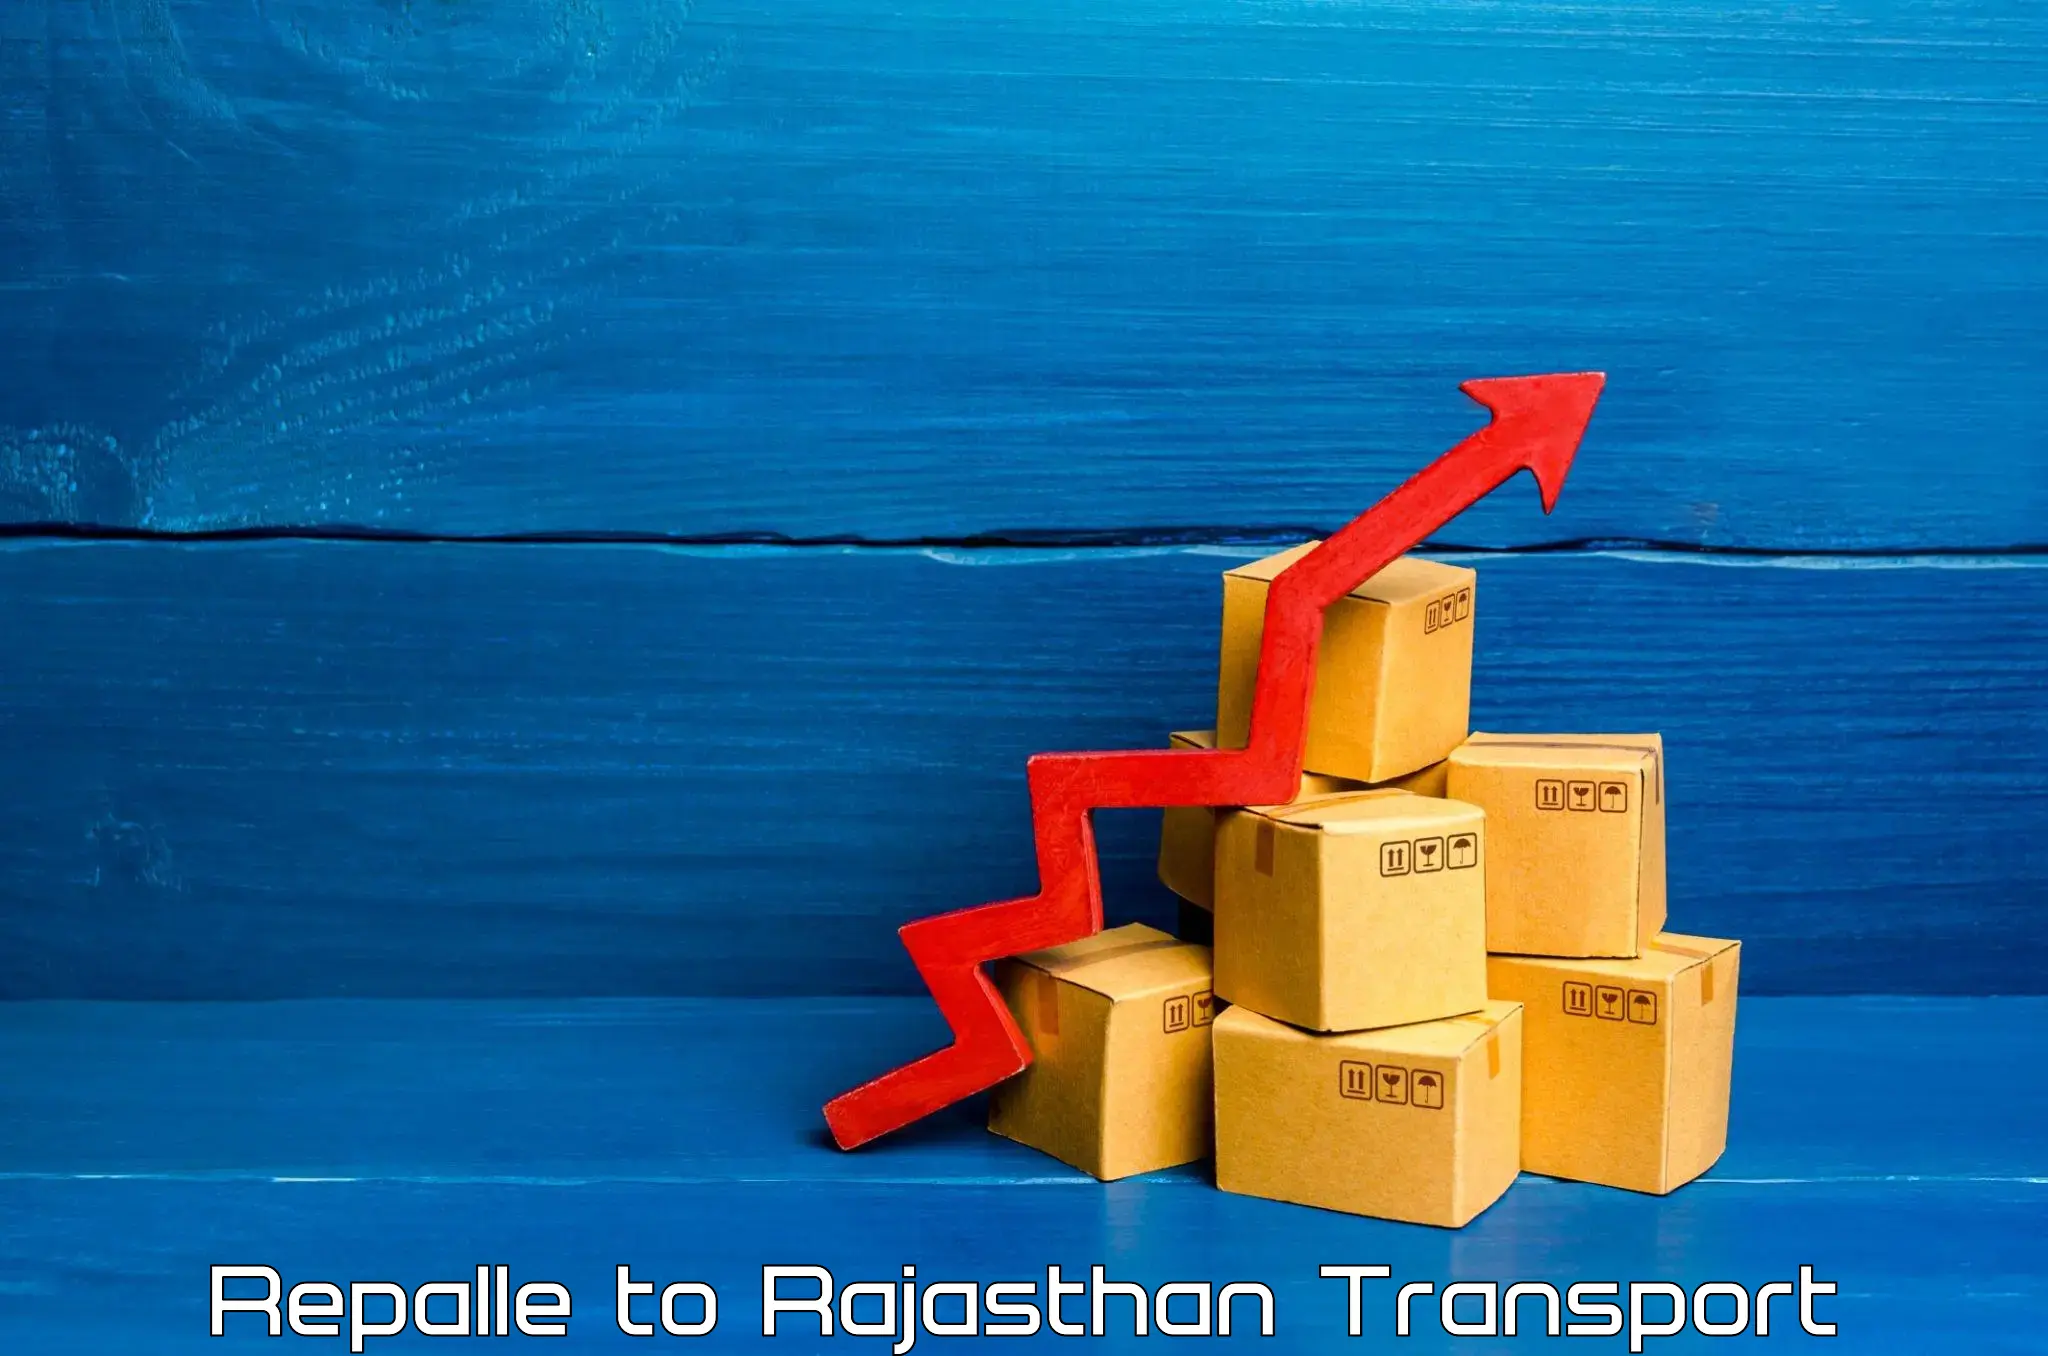 Air cargo transport services Repalle to Rajasthan